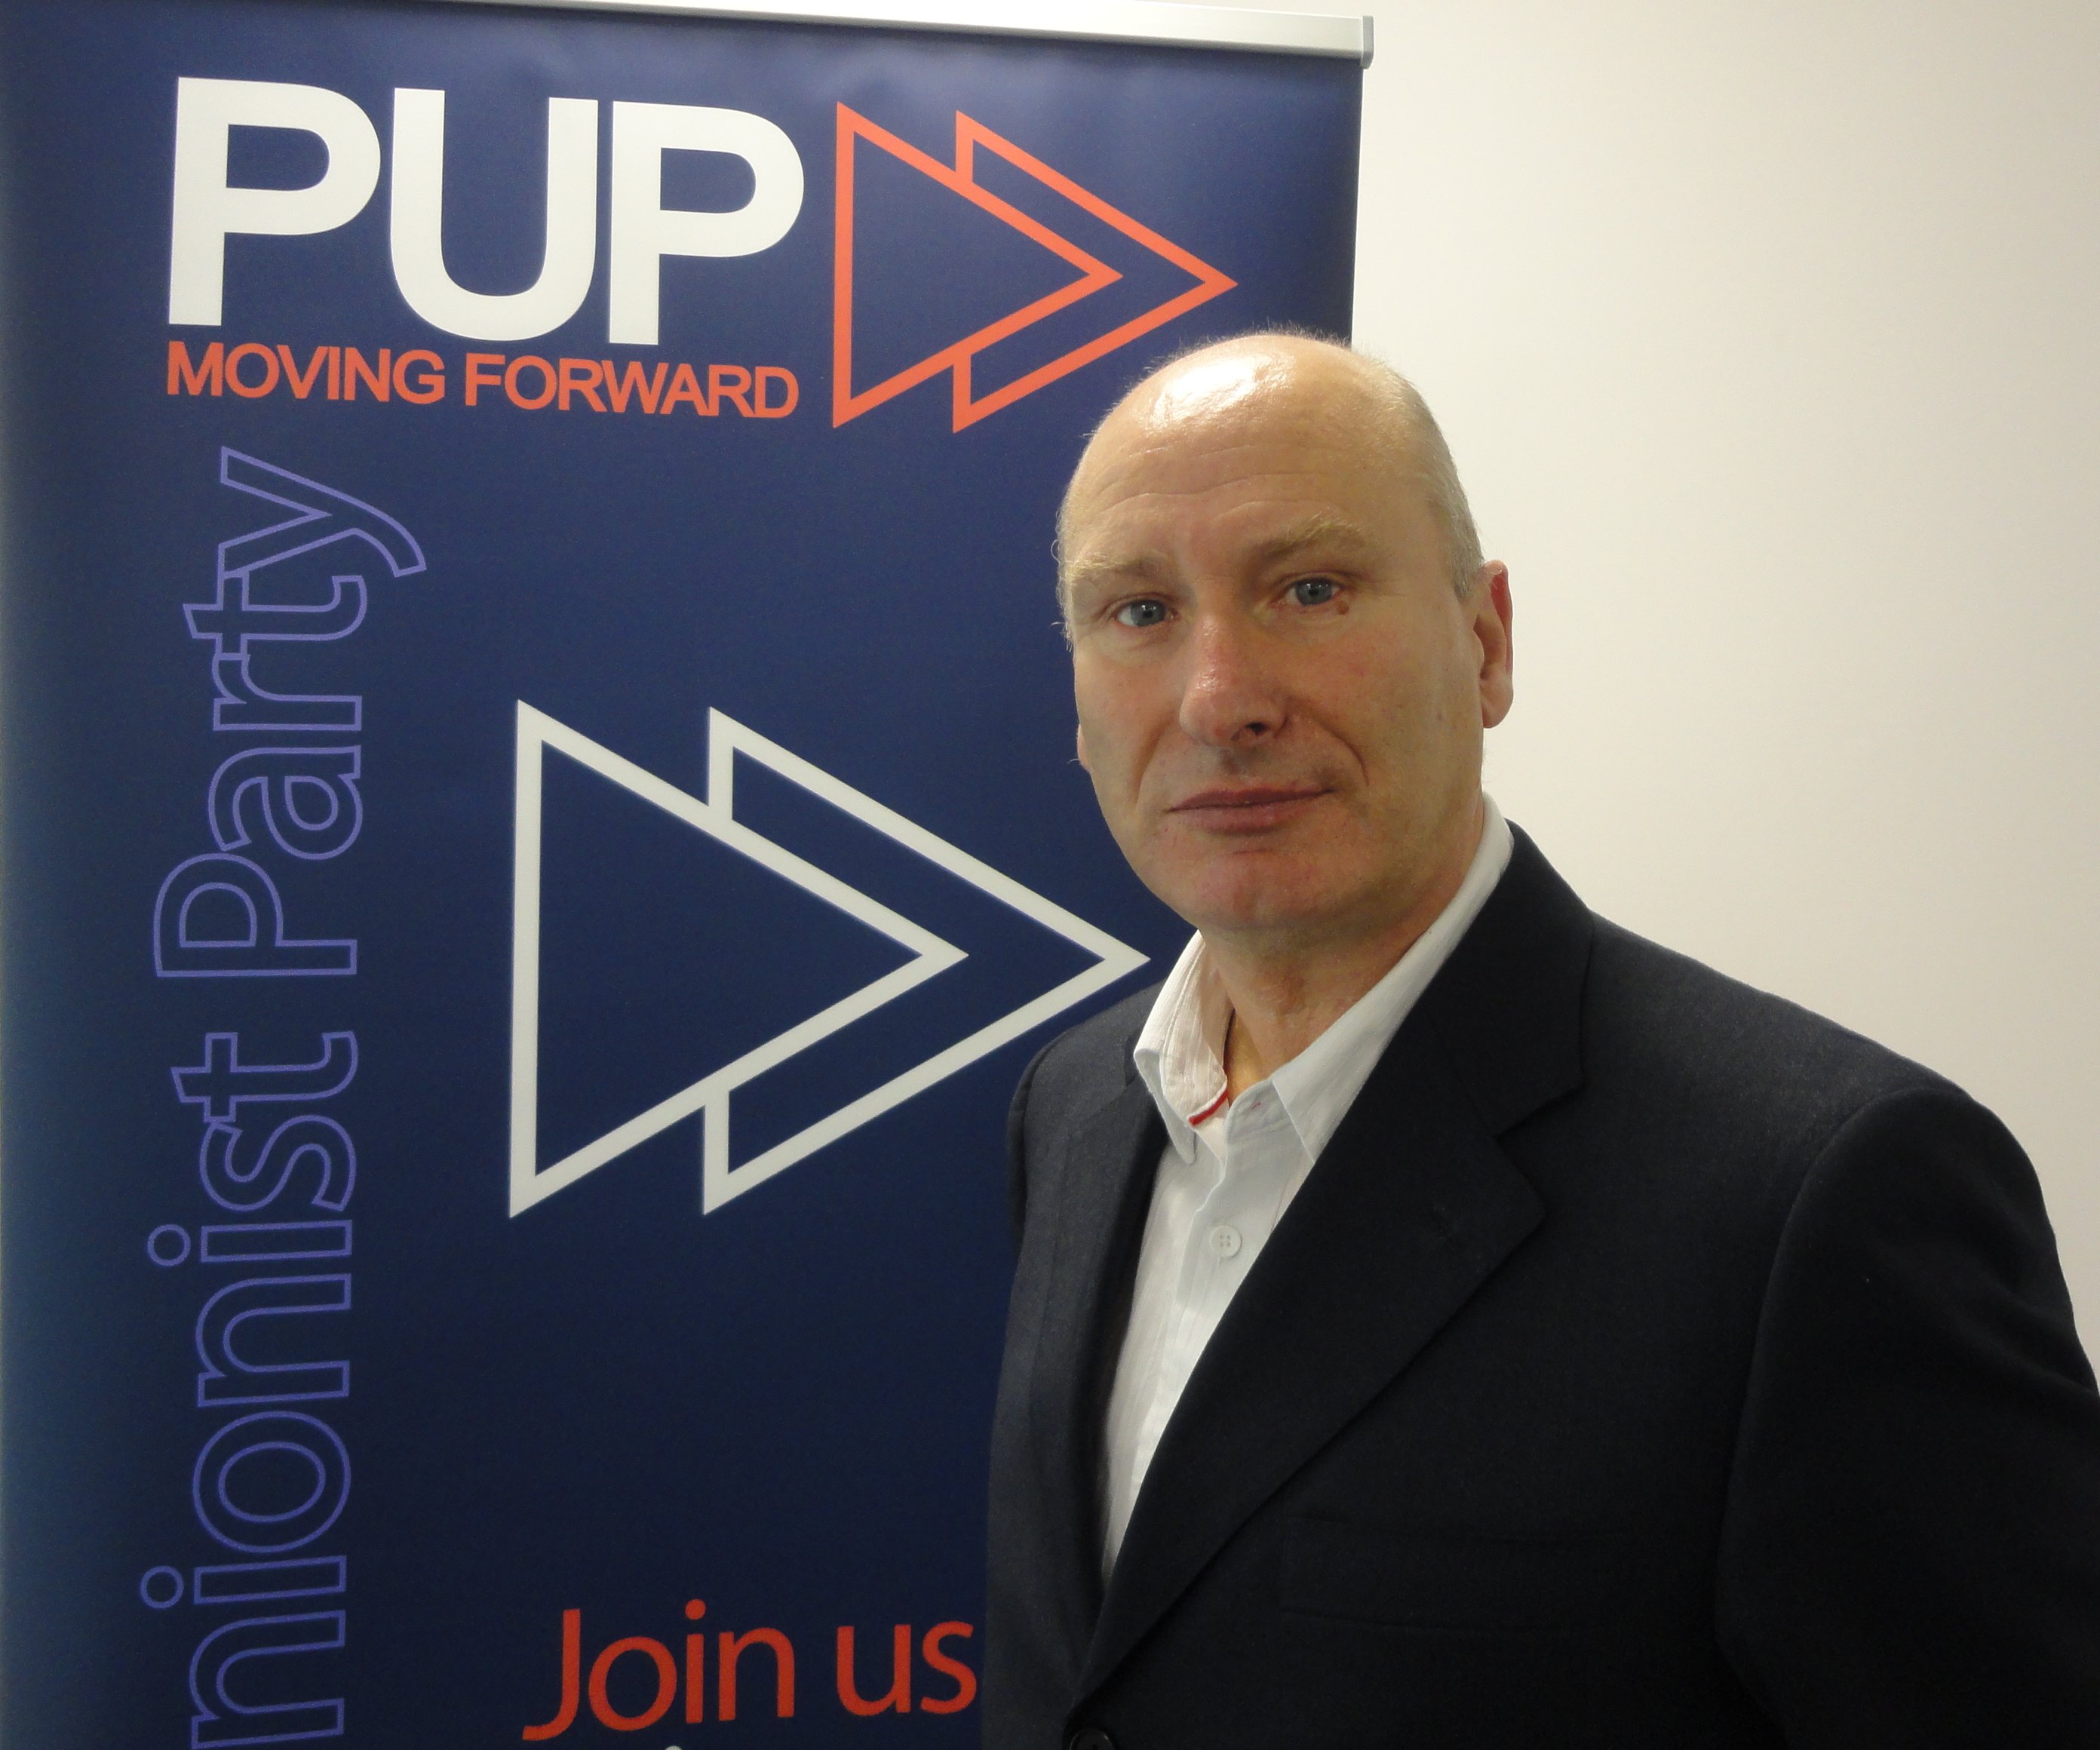 Billy Hutchinson - newly elected as PUP leader